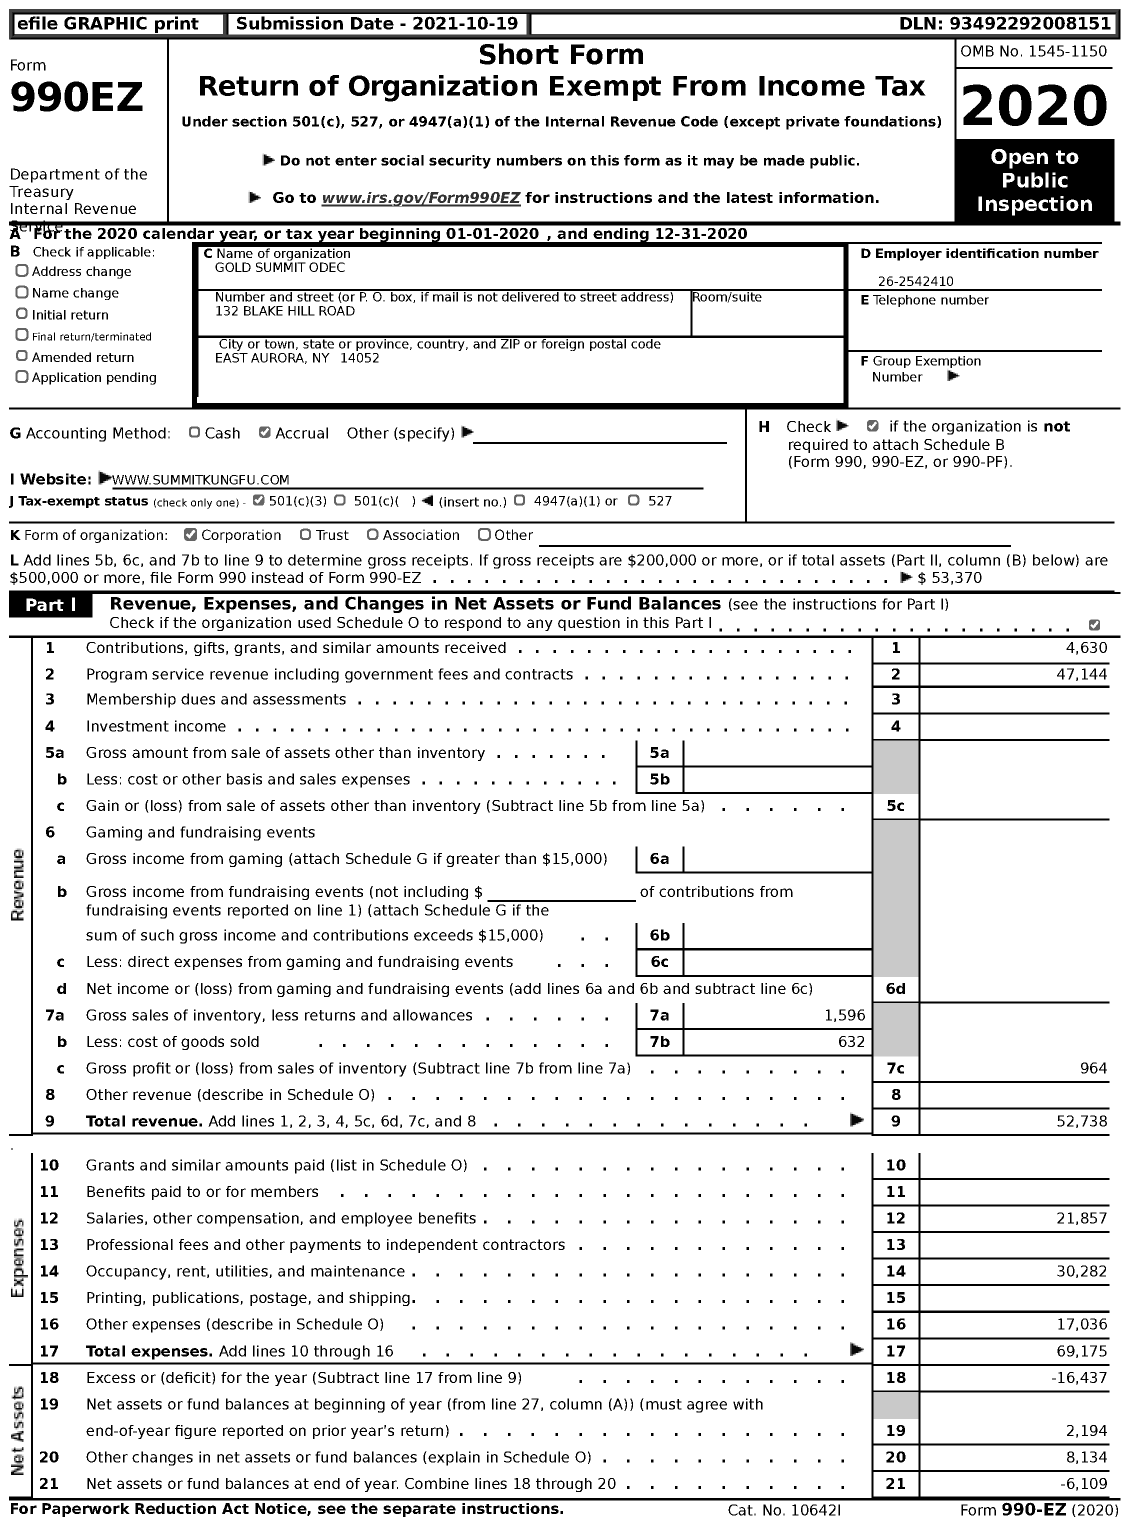 Image of first page of 2020 Form 990EZ for Gold Summit Odec